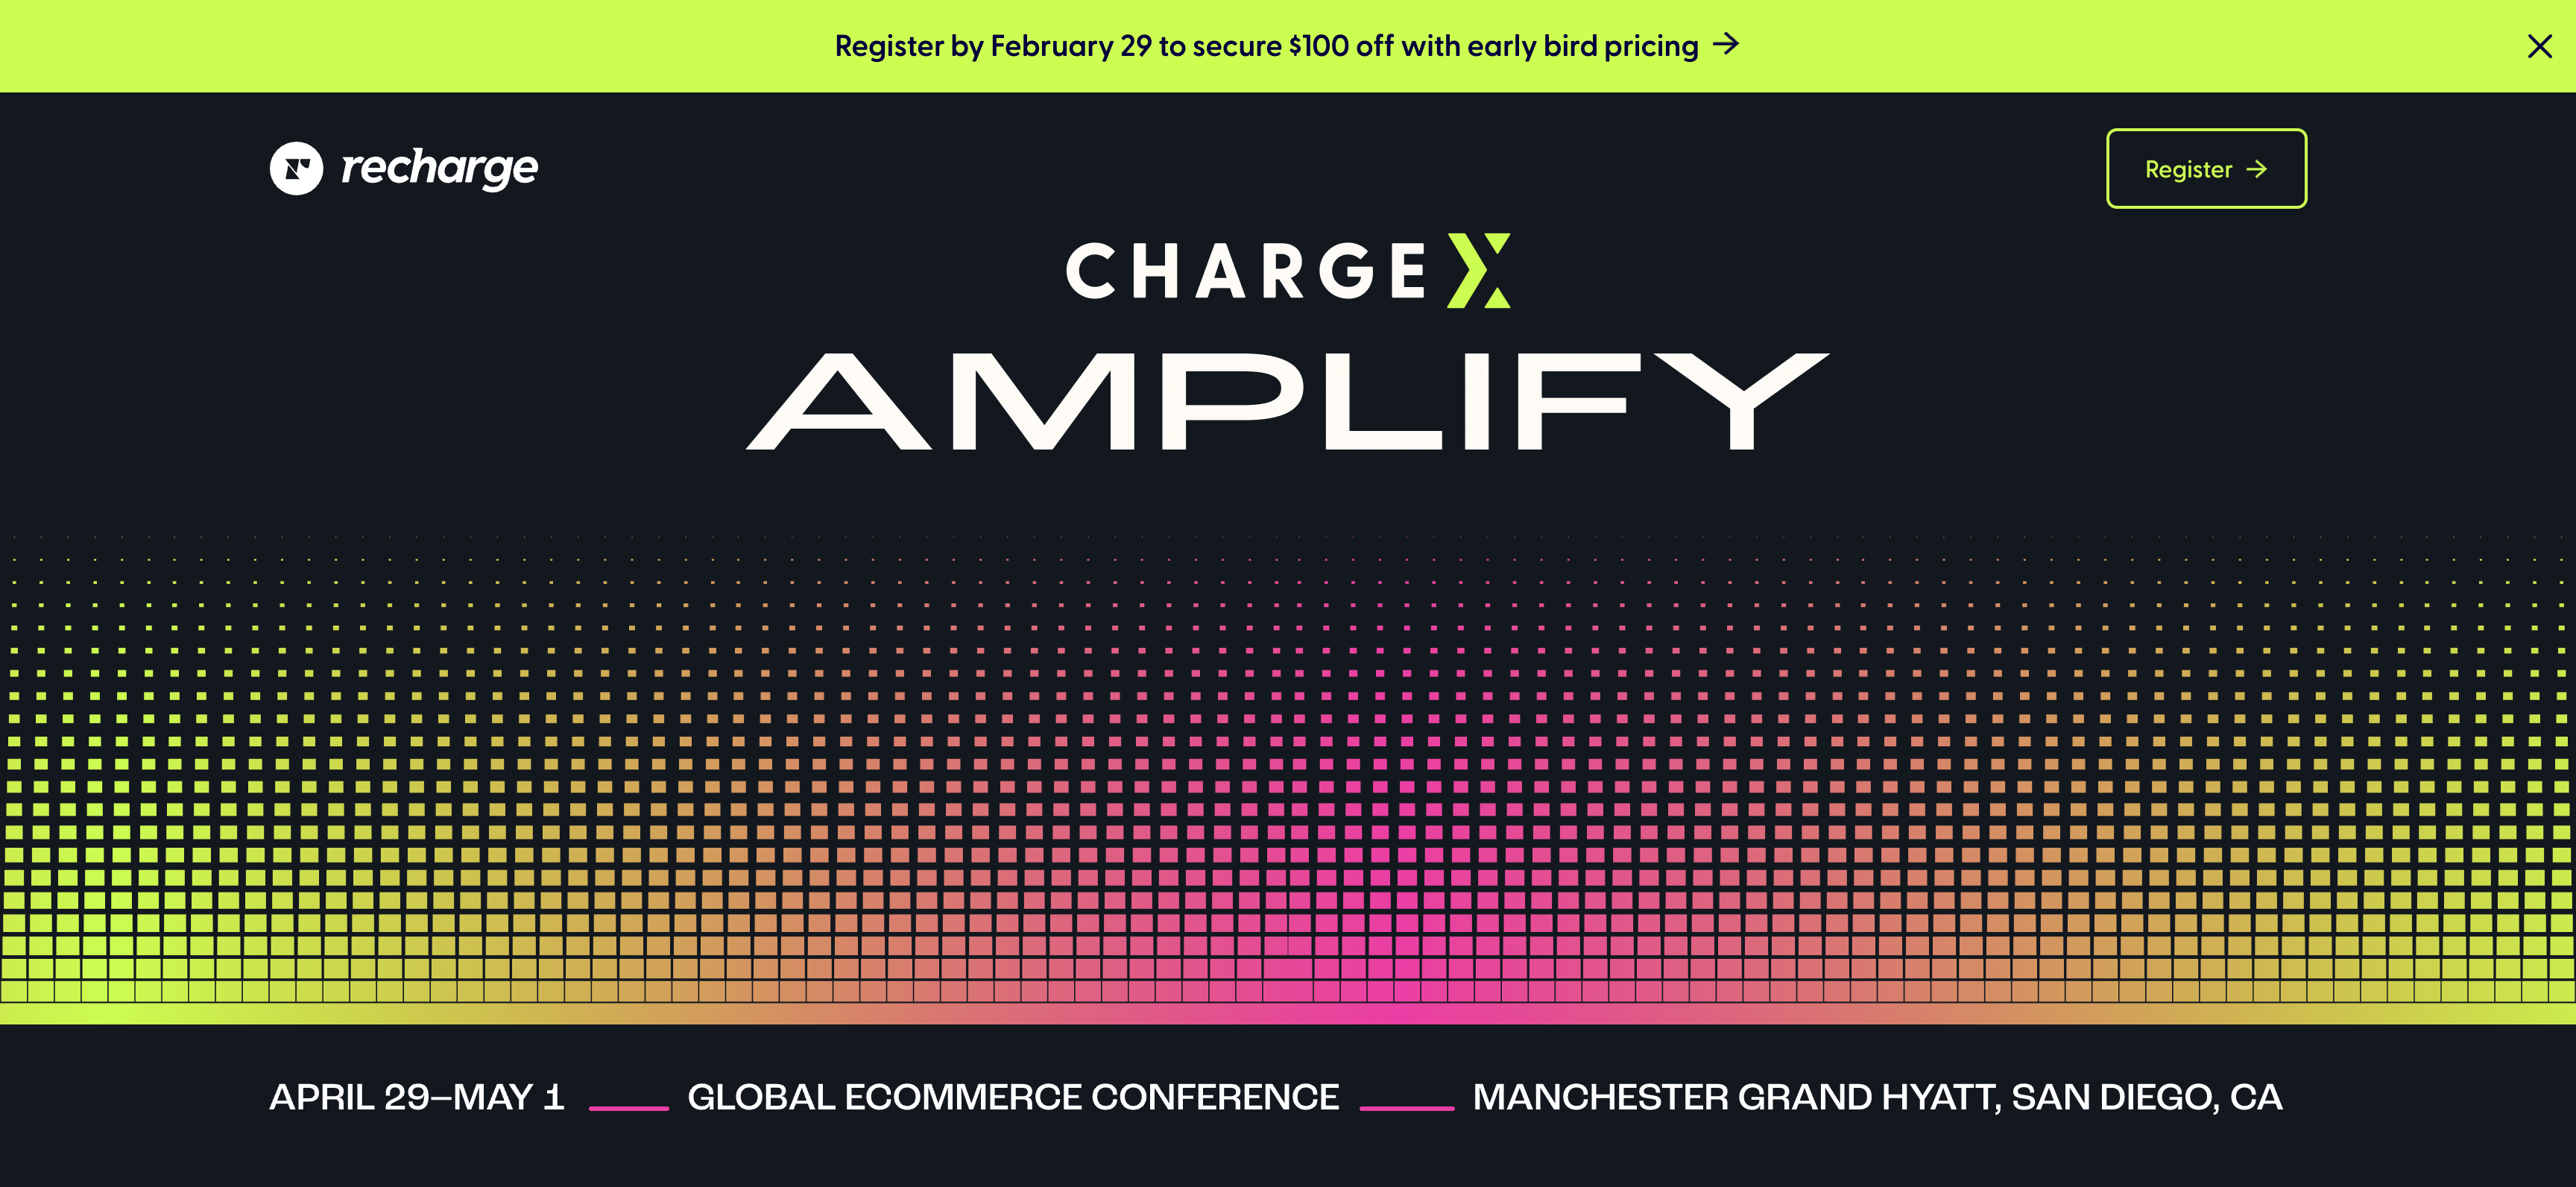  The image is a promotional graphic for an event titled "CHARGE X AMPLIFY". It features a vibrant background that transitions from green at the top to yellow, orange, and then pink at the bottom, with a dotted pattern throughout. At the top of the image, there's the logo of "recharge" in white, followed by a promotional message in white text that reads "Register by February 29 to secure $100 off with early bird pricing" and a yellow "Register" button with an arrow pointing right. The main title "CHARGE X AMPLIFY" is in large, bold white letters in the center. Below the title, the event details are provided: "APRIL 29–MAY 1 — GLOBAL ECOMMERCE CONFERENCE — MANCHESTER GRAND HYATT, SAN DIEGO, CA", with a pink line underscoring the text. The design is modern and eye-catching, likely intended to attract attention to the event and encourage early registration.